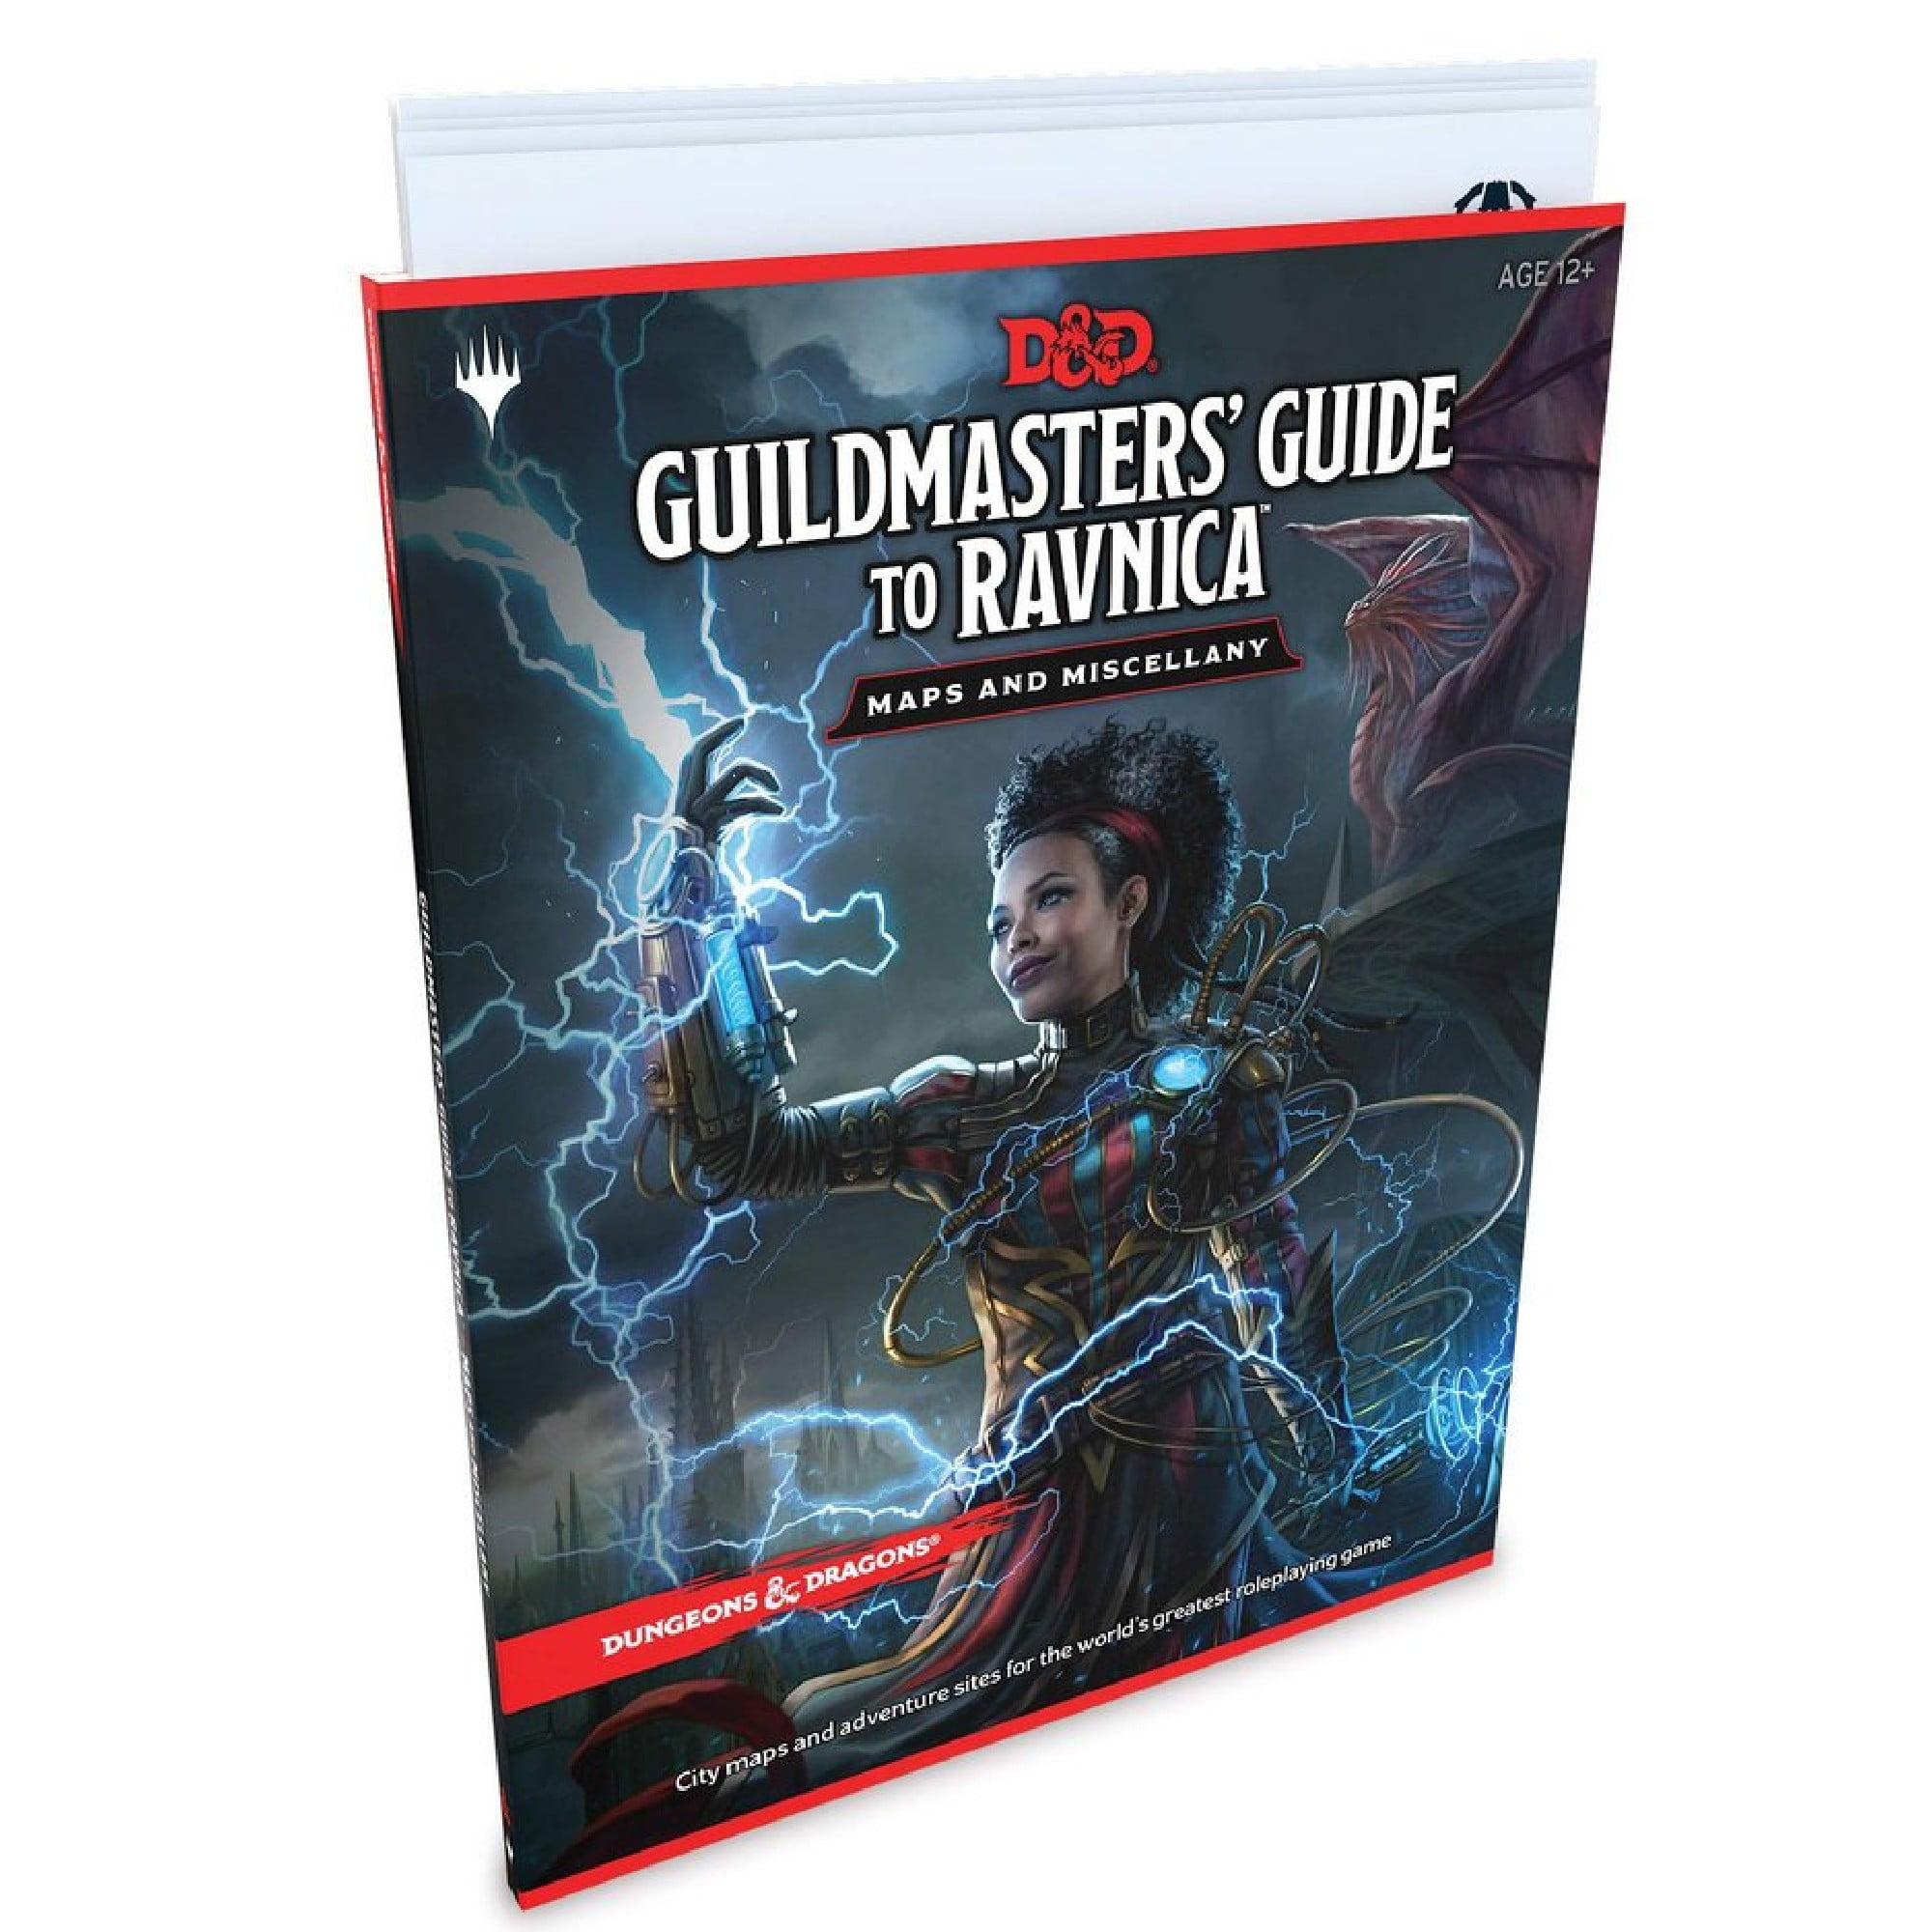 Dungeons & Dragons - Guildmasters’ Guide to Ravnica